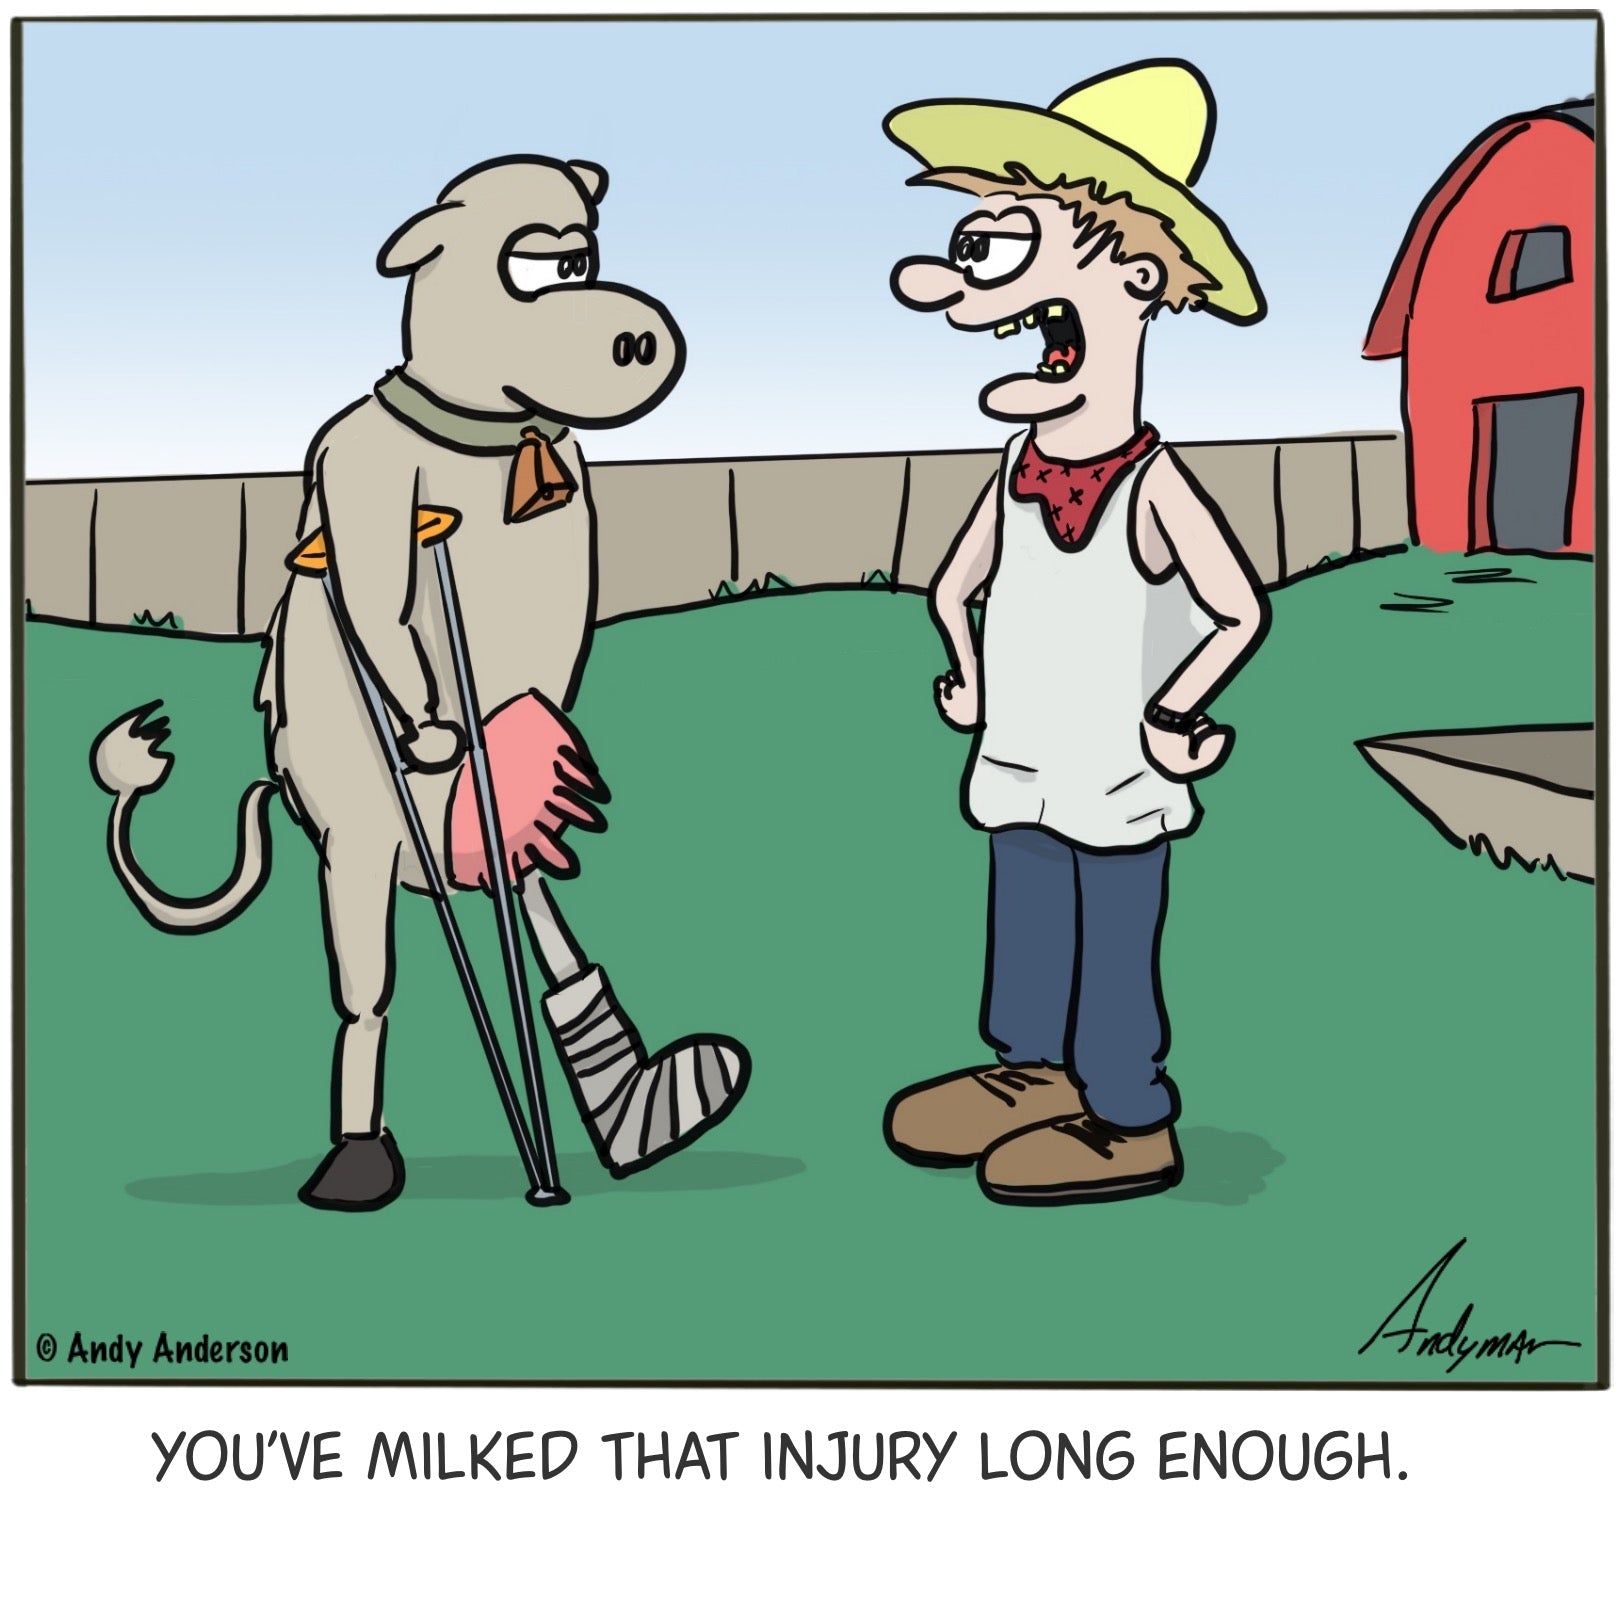 Cartoon about a cow milking an injury by Andy Anderson